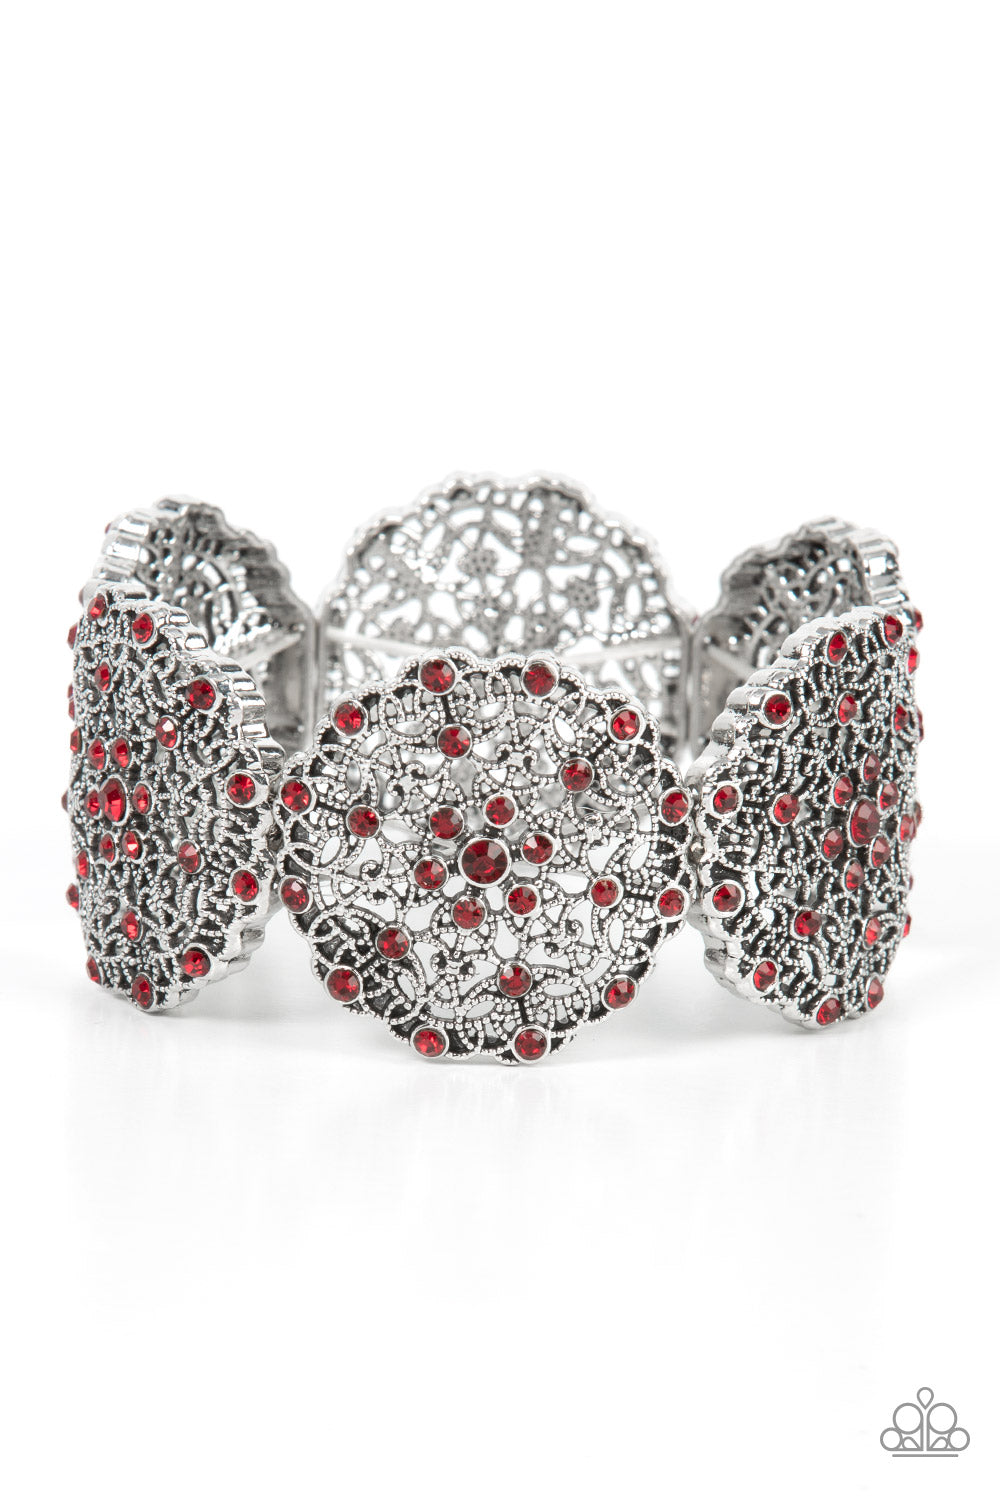 All in the Details - Red and Silver Bracelet - Paparazzi Accessories - Dotted with fiery red rhinestones, studded silver frames are filled with mandala-like filigree details and threaded along stretchy bands around the wrist for a glitzy pop of color. Sold as one individual bracelet.